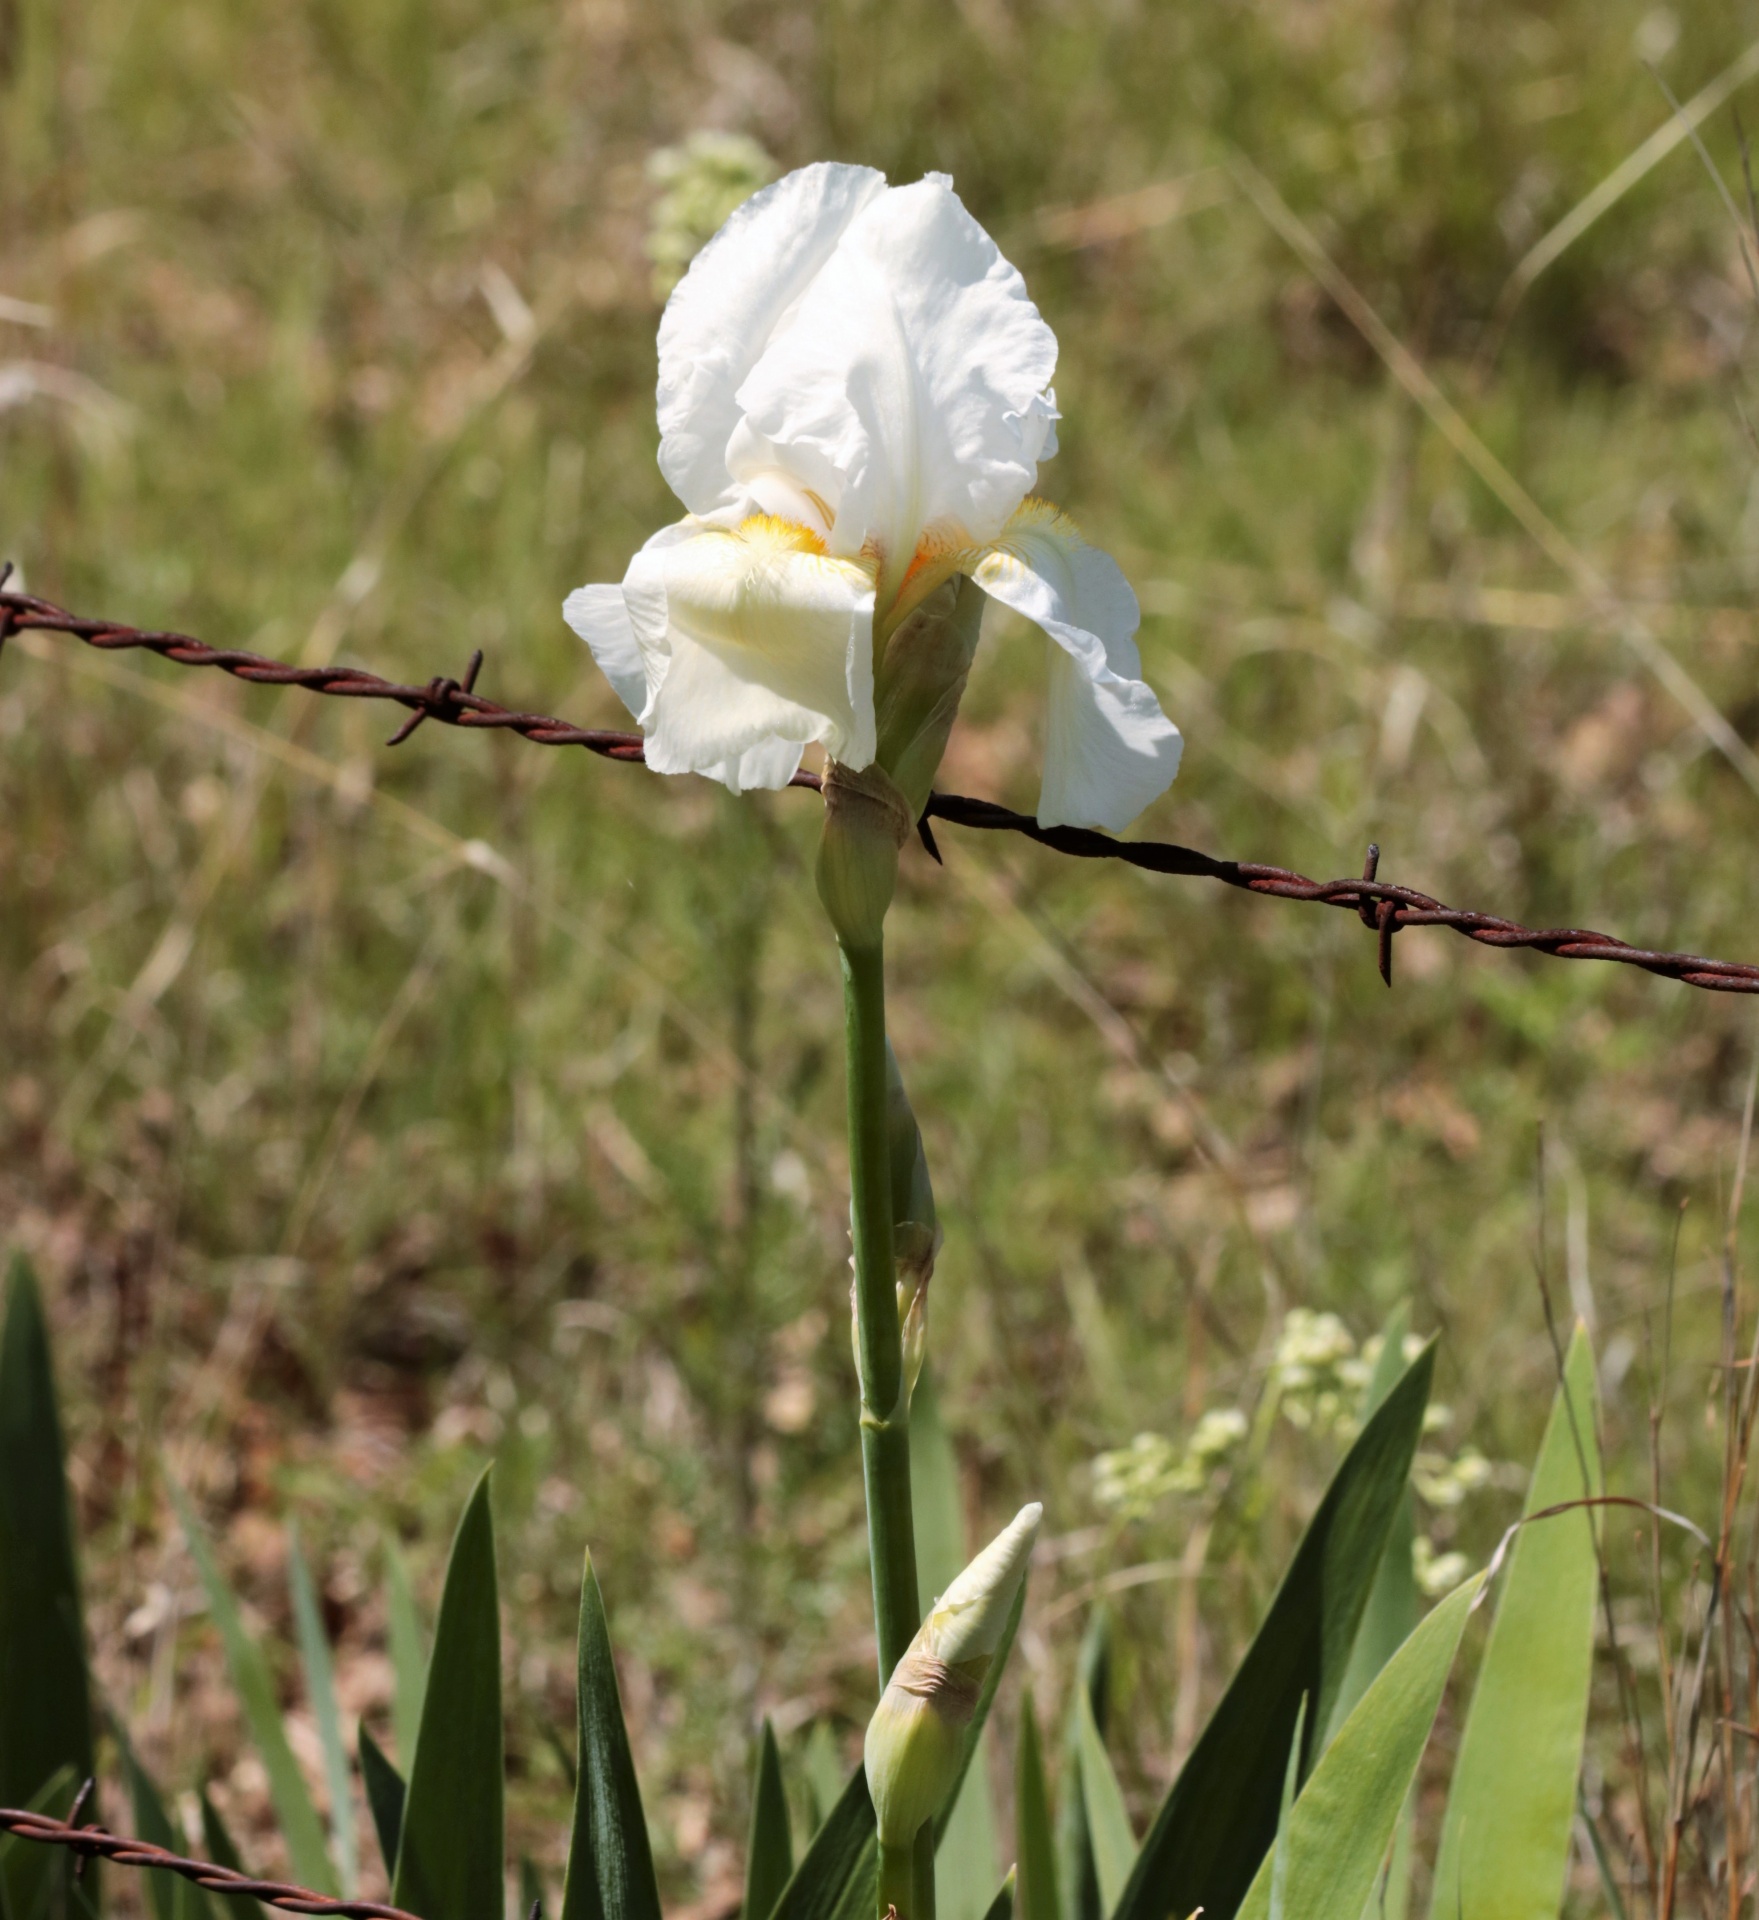 A beautiful white bearded iris stands tall against a barbed wire fence in a green Oklahoma country field.